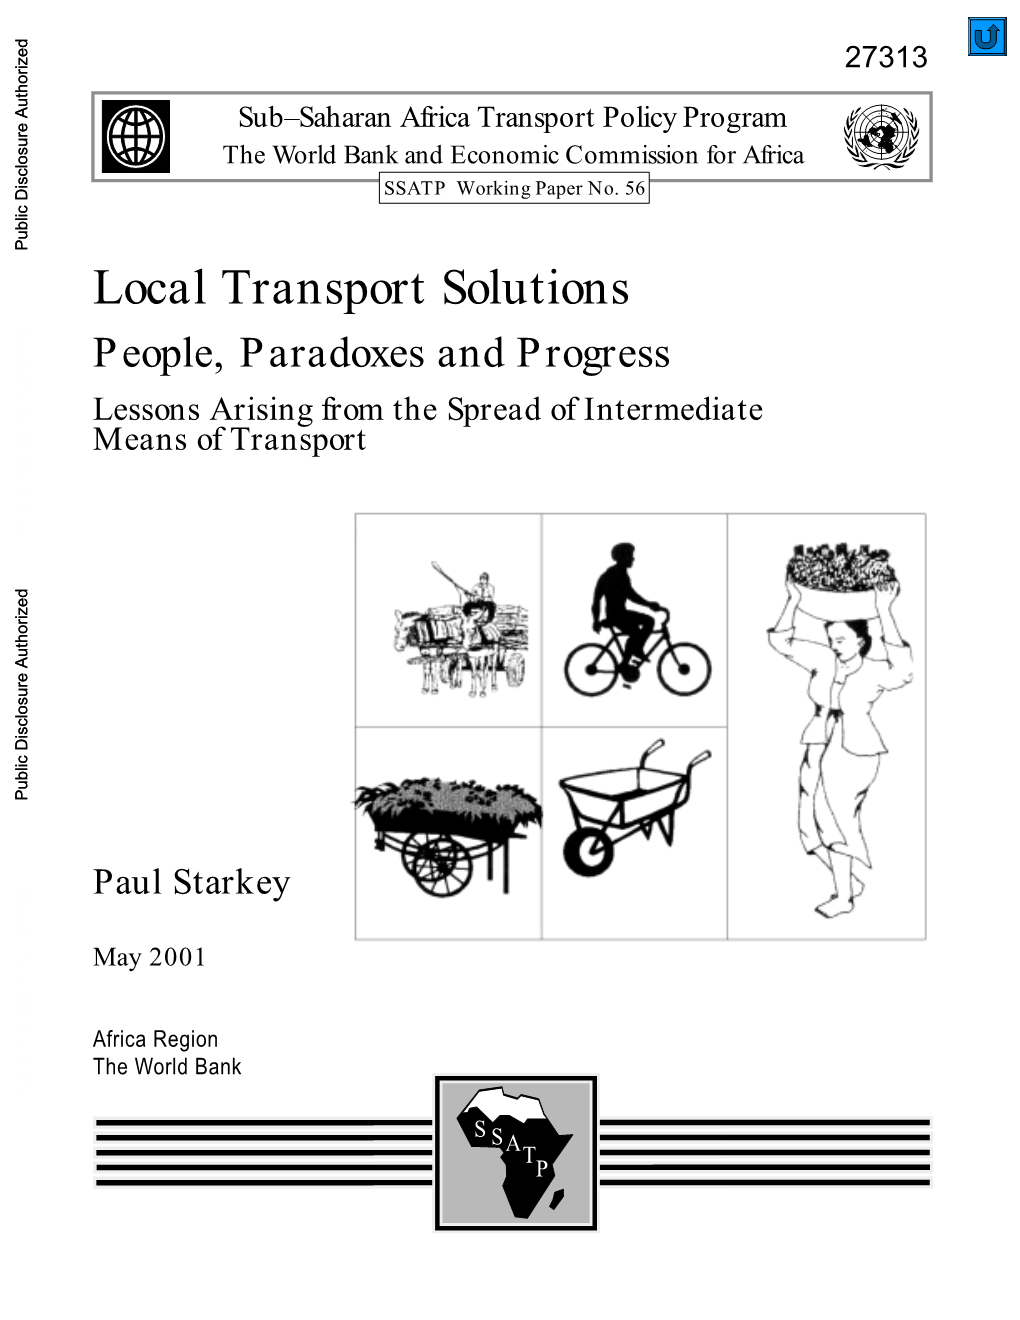 Sub–Saharan Africa Transport Policy Program the World Bank and Economic Commission for Africa SSATP Working Paper No